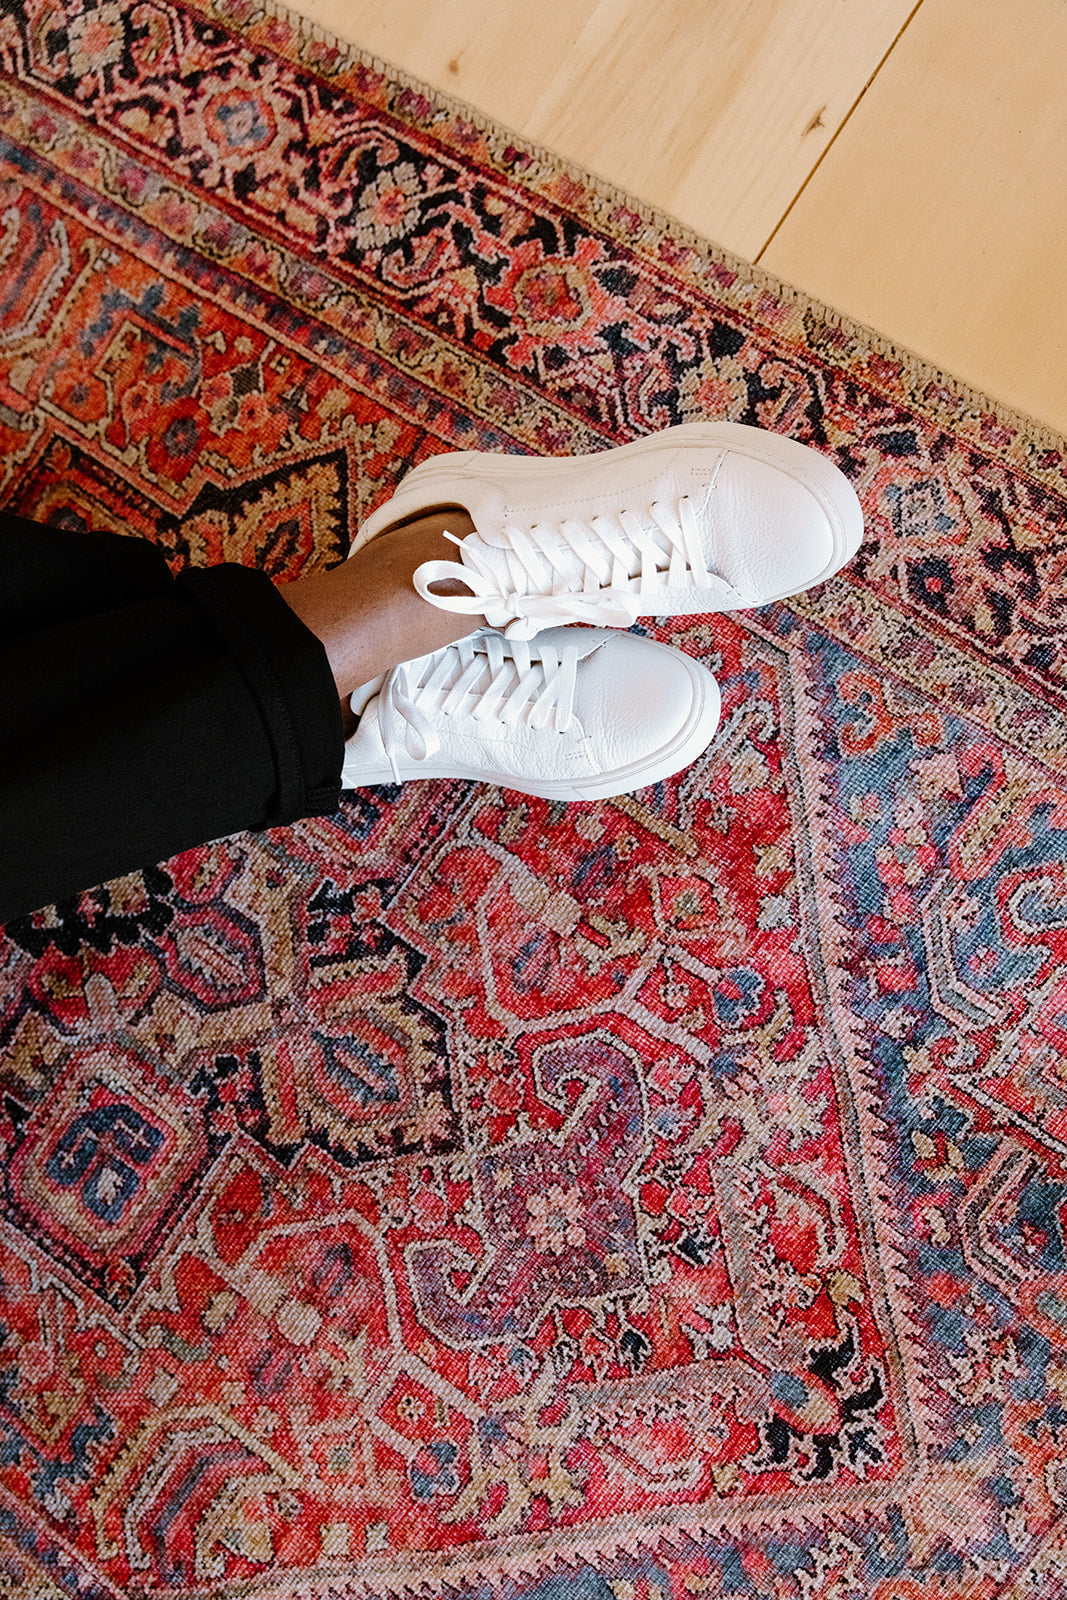 A person standing on a colorful rug wearing white sneakers and black pants.